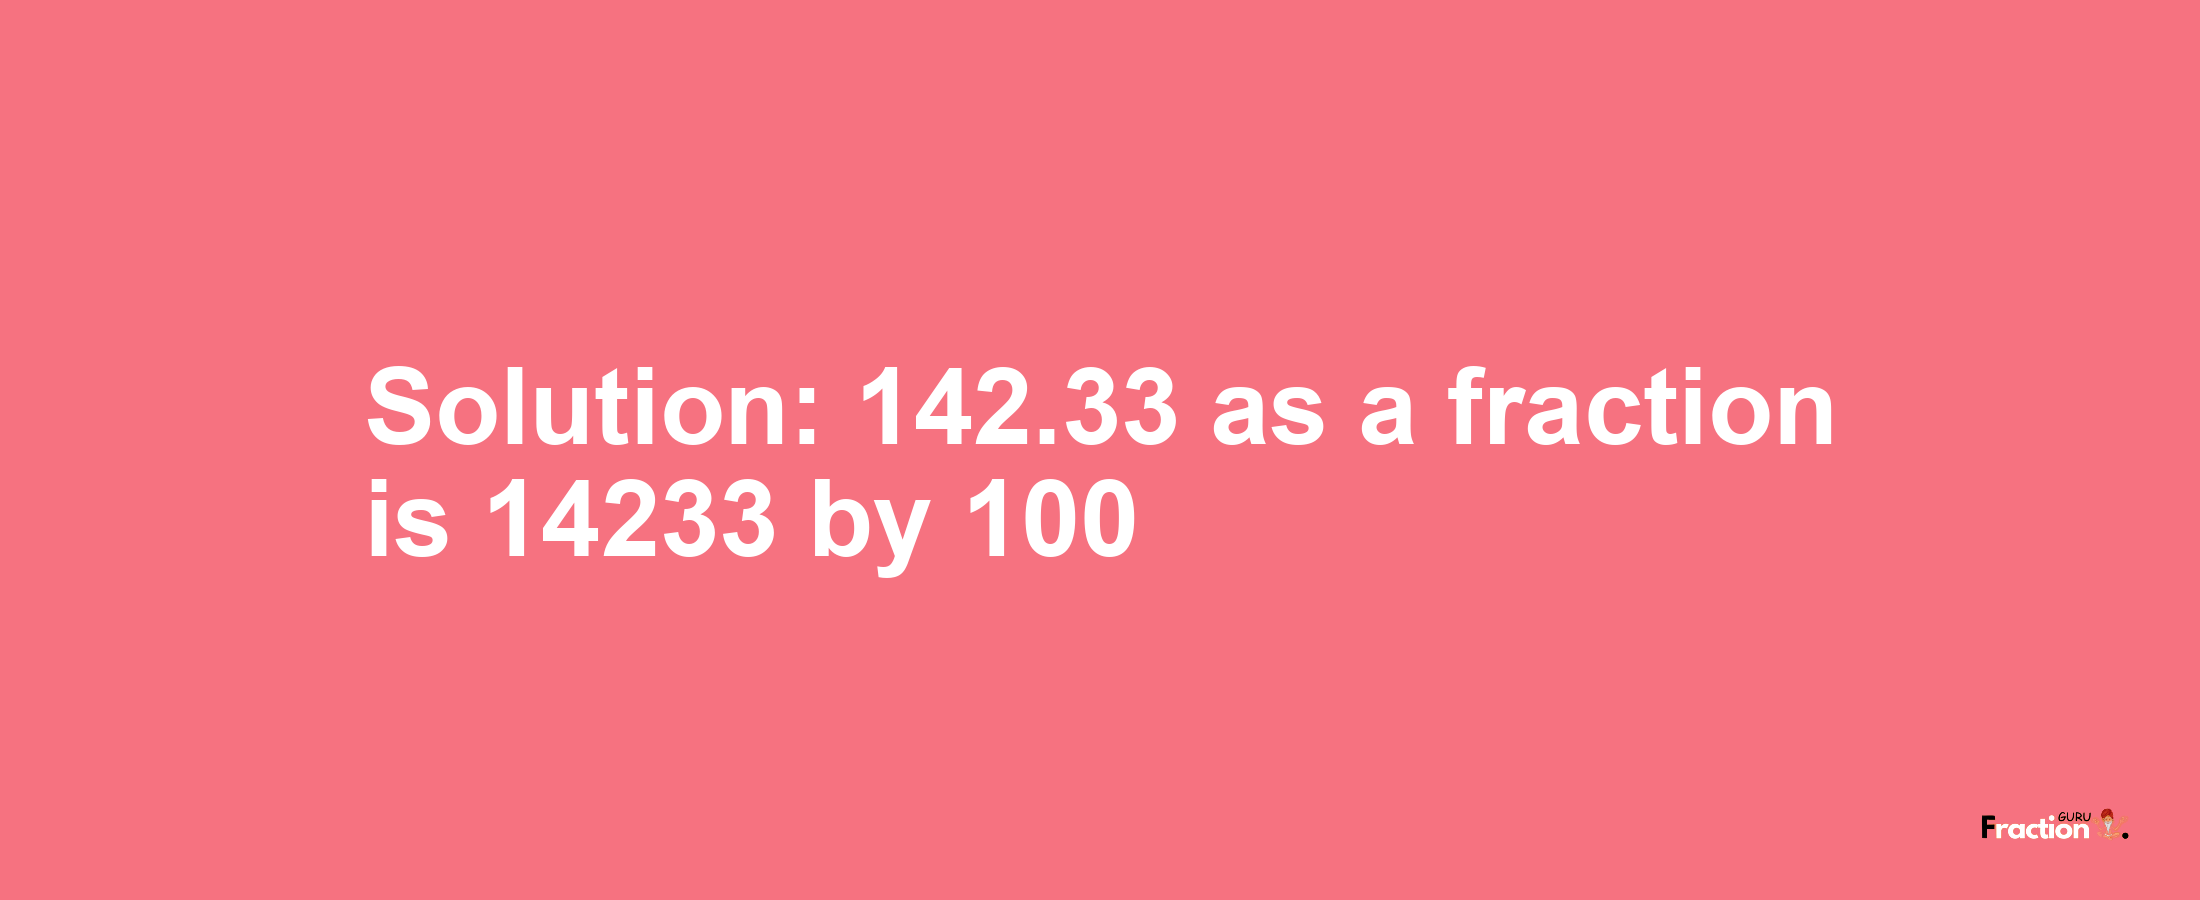 Solution:142.33 as a fraction is 14233/100